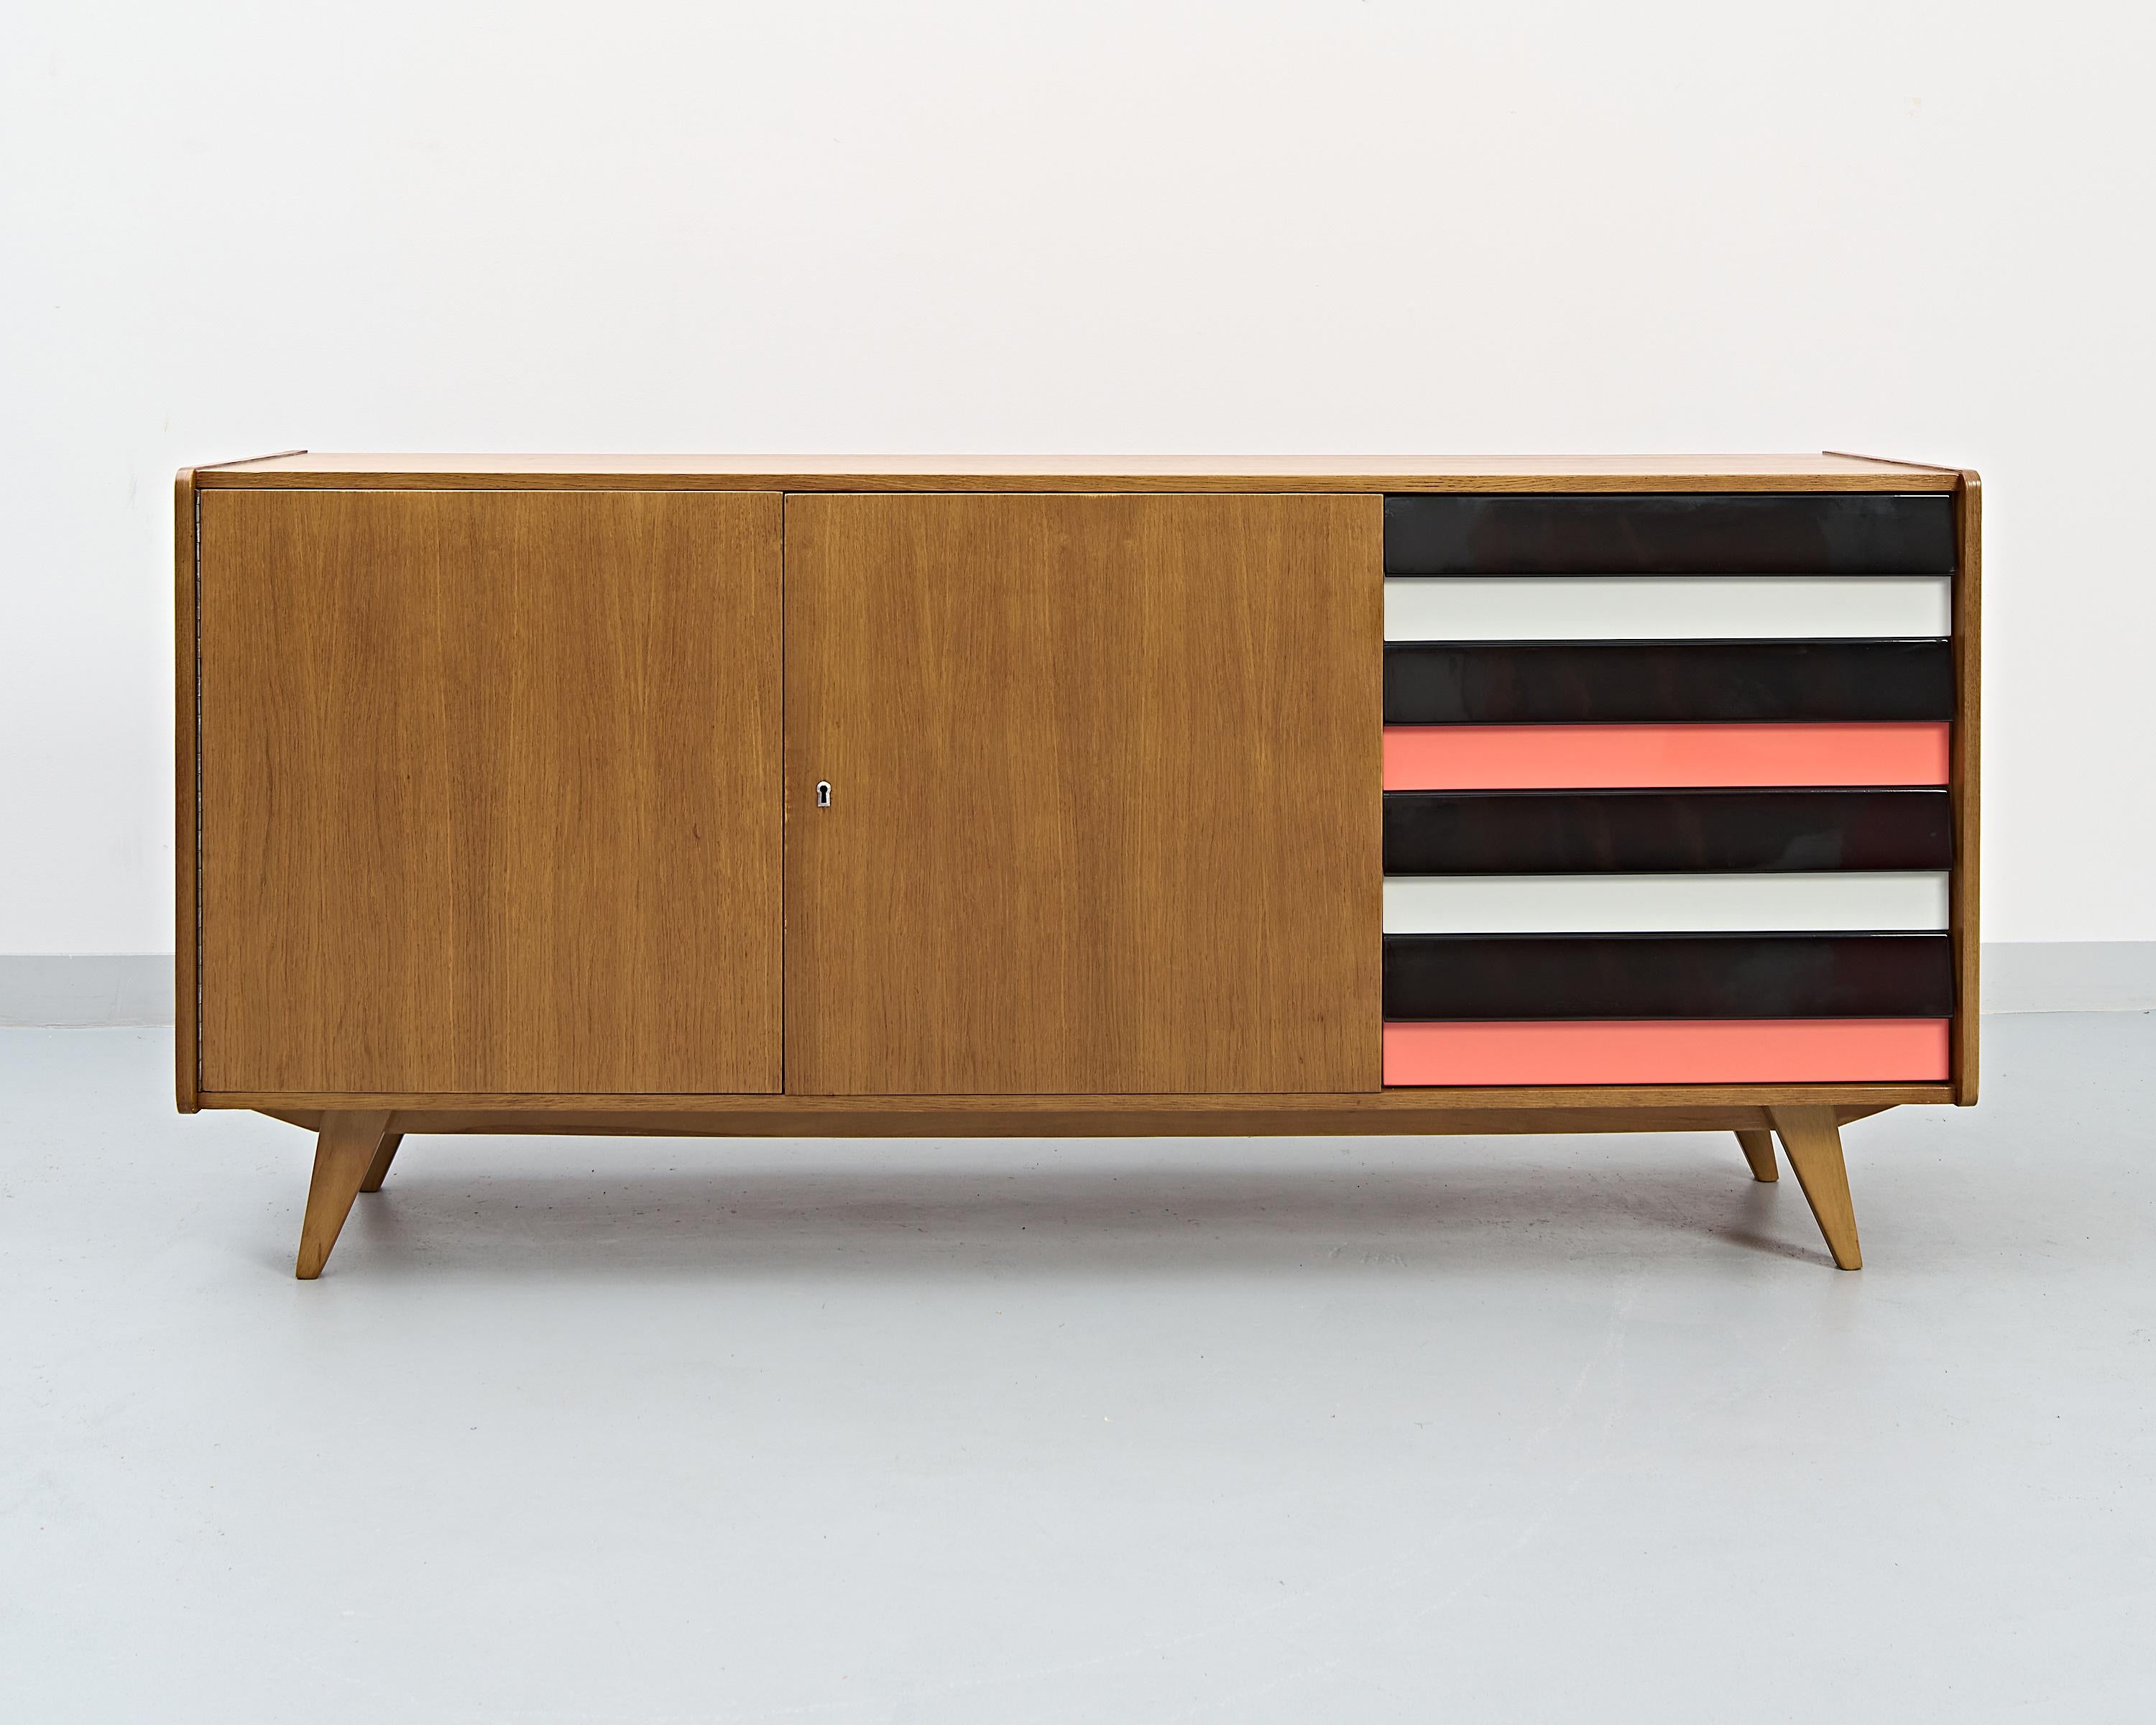 The U-460 sideboard designed by the czech designer Jiří Jiroutek as a part of the U series. Works began after the enormous success of the czech pavilion at the Brussels ’58 Expo and the series became one of the leading examples of the newly formed